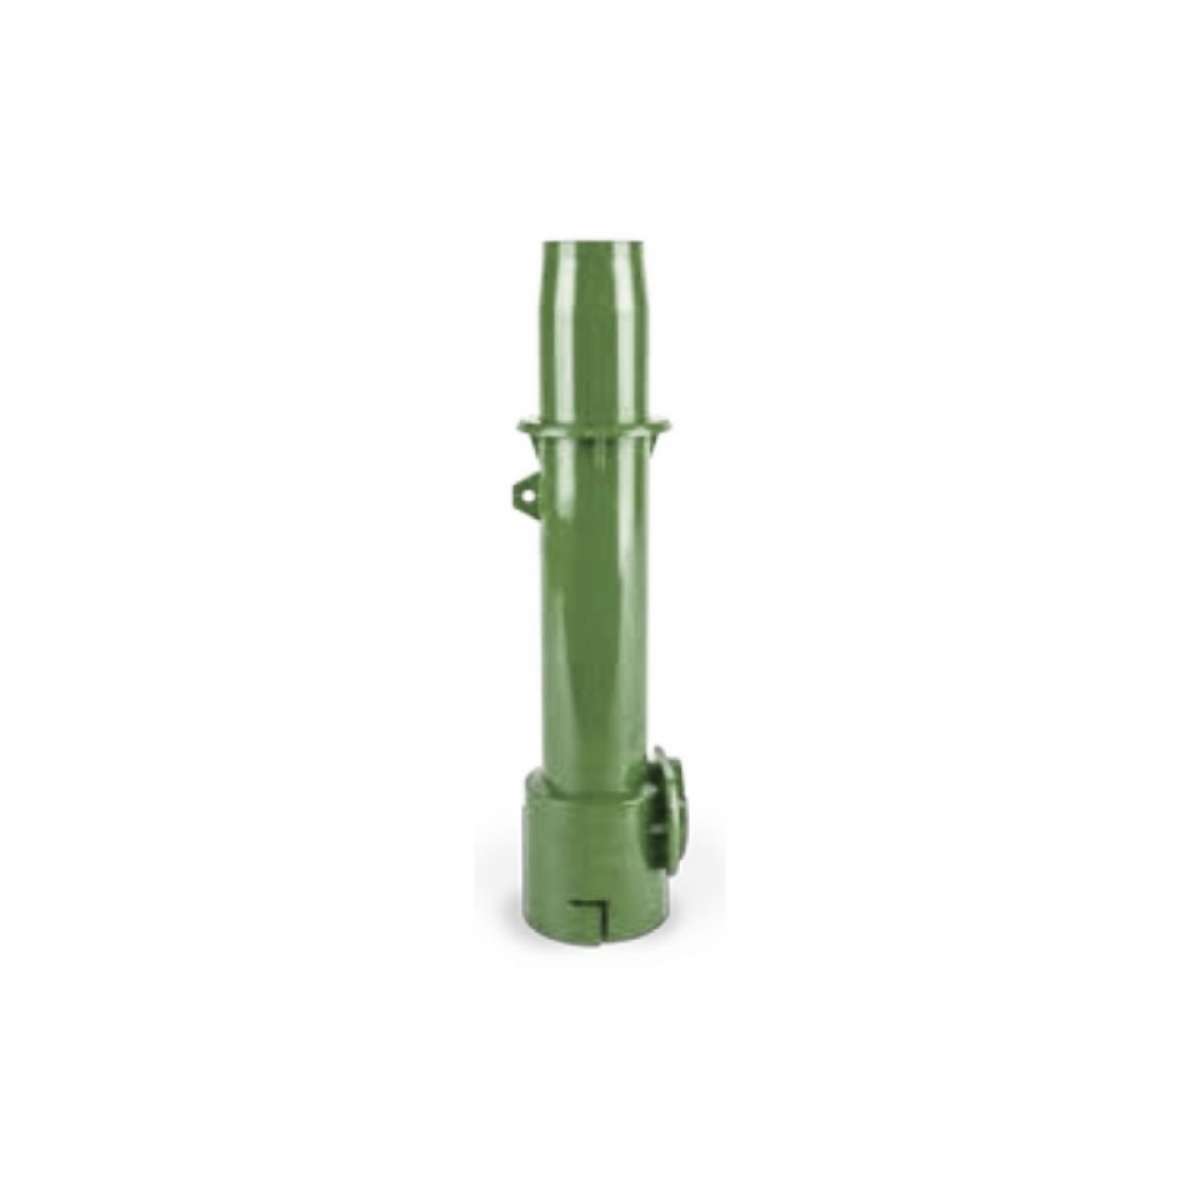 IsoLink 8" Rigid Spout with 1" Tip - Dark Green